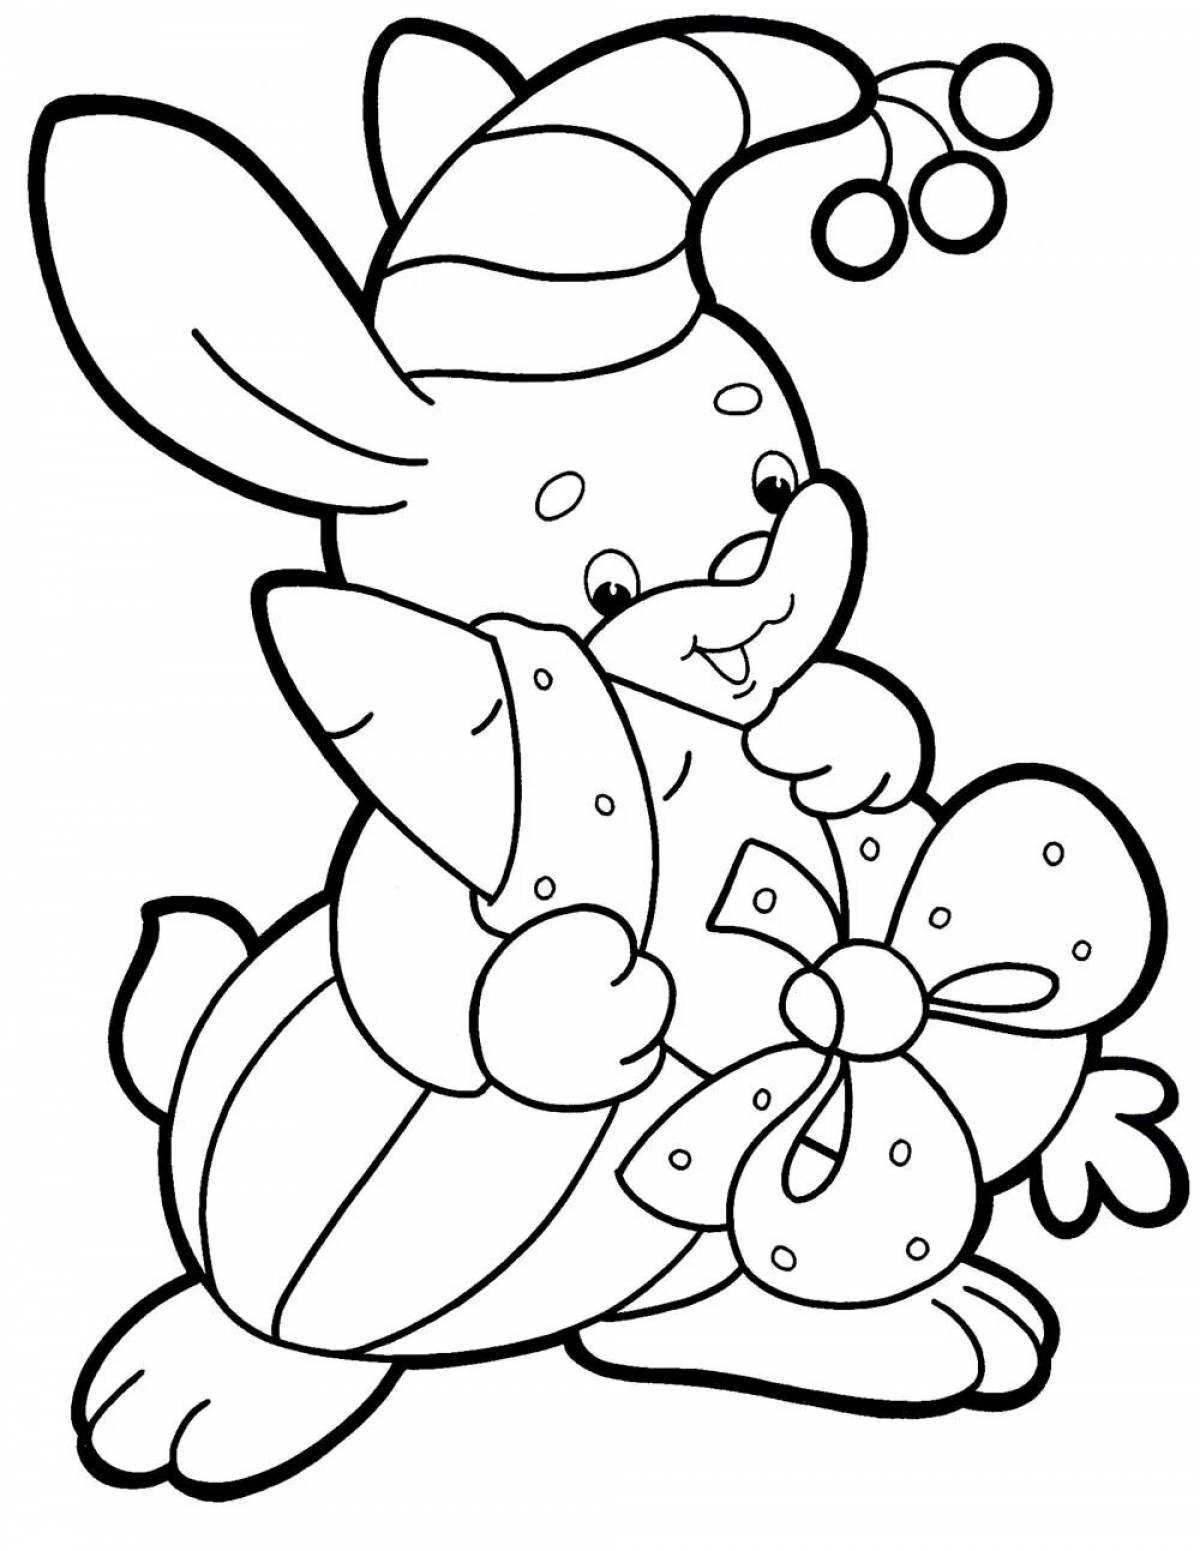 Colorful Christmas rabbit coloring book